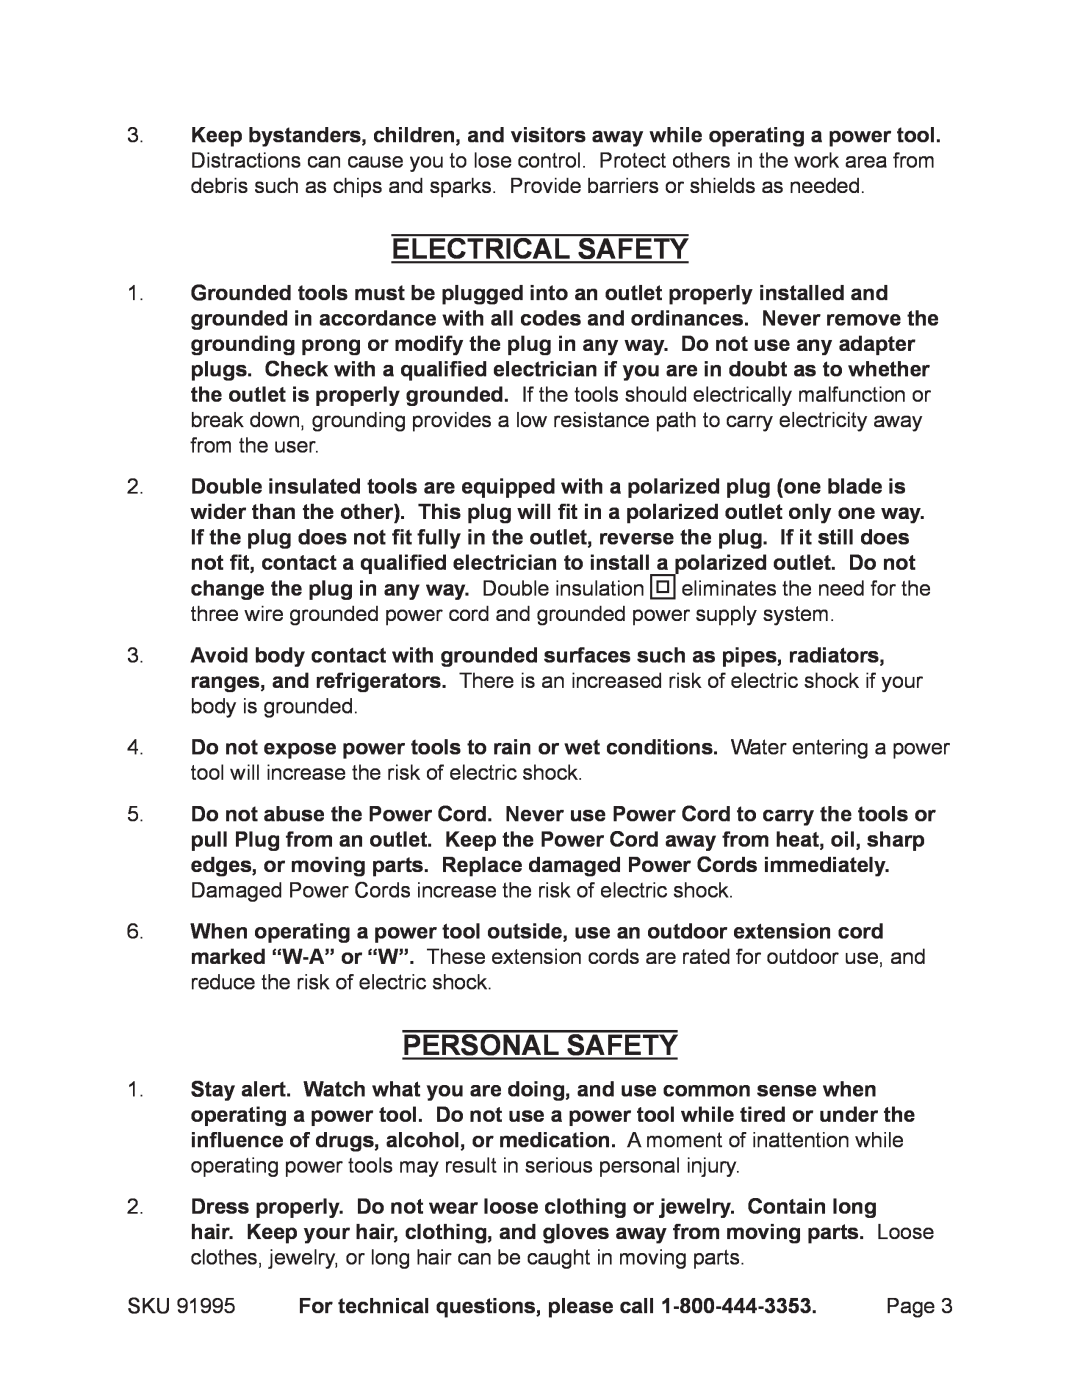 Chicago Electric 91995 operating instructions Electrical Safety, Personal Safety, For technical questions, please call 